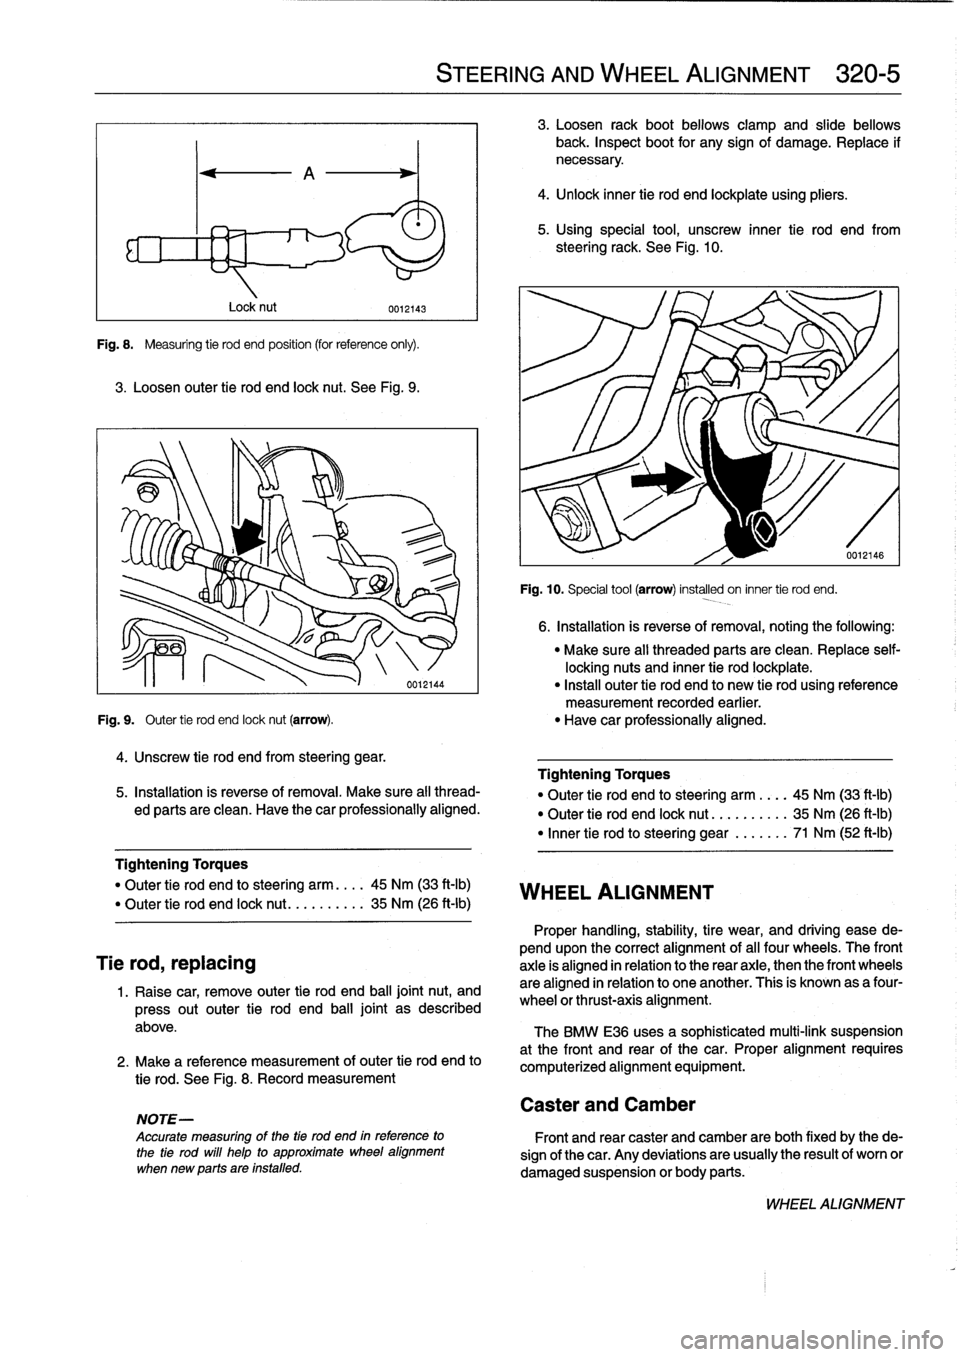 BMW 328i 1994 E36 User Guide 
Fig
.
8
.

	

Measuring
tie
rod
end
position
(for
reference
only)
.

3
.
Loosen
outer
tie
rod
end
lock
nut
.
See
Fig
.
9
.

Lock
nut

4
.
Unscrew
tie
rod
end
from
steering
gear
.

0012143

"
Make
sur